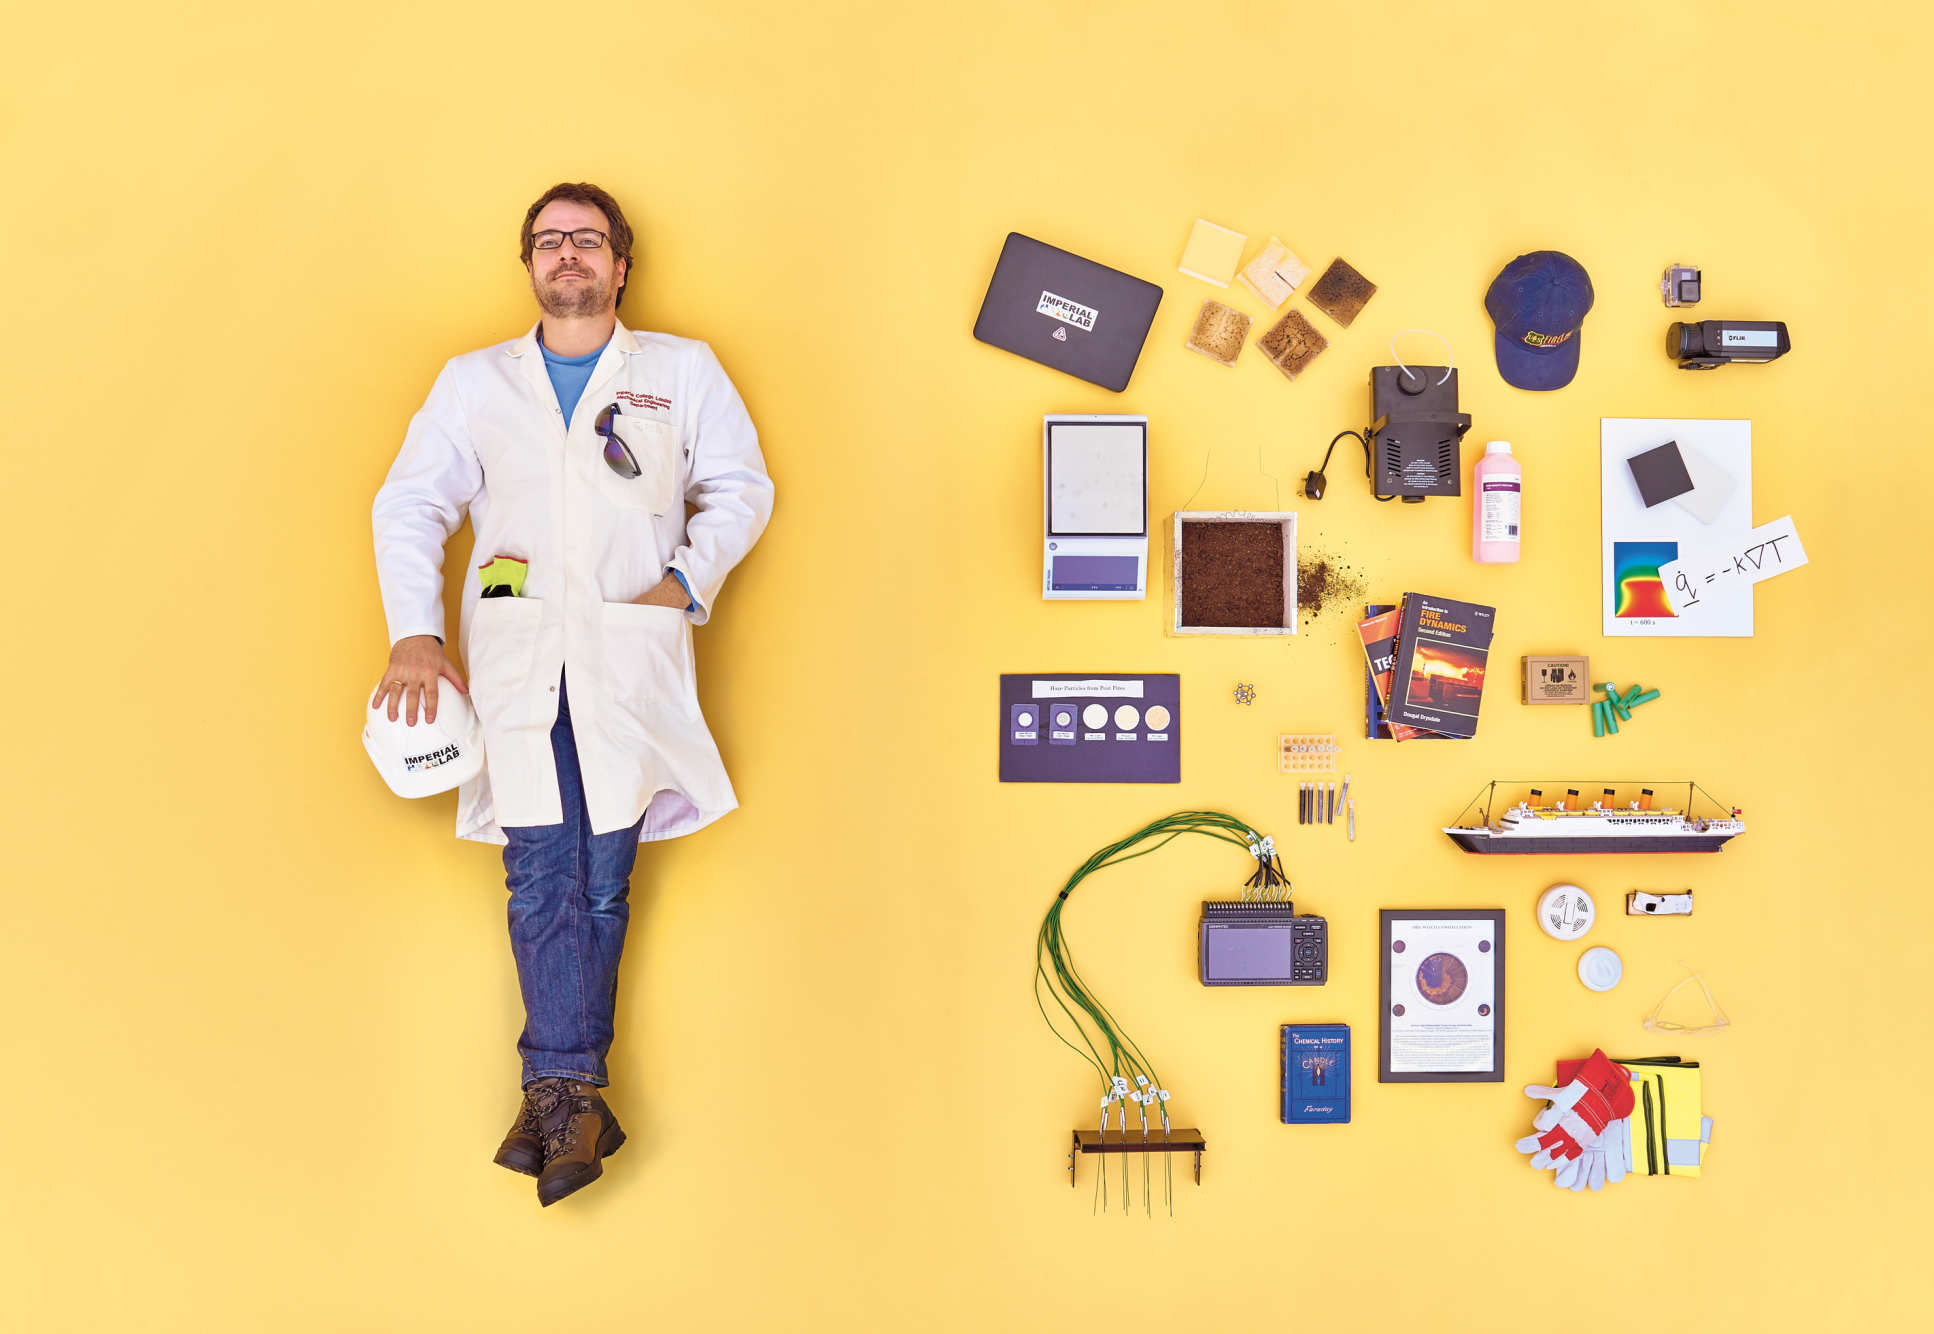 Professor Guillermo Rein surrounded by his research equipment and souvenirs